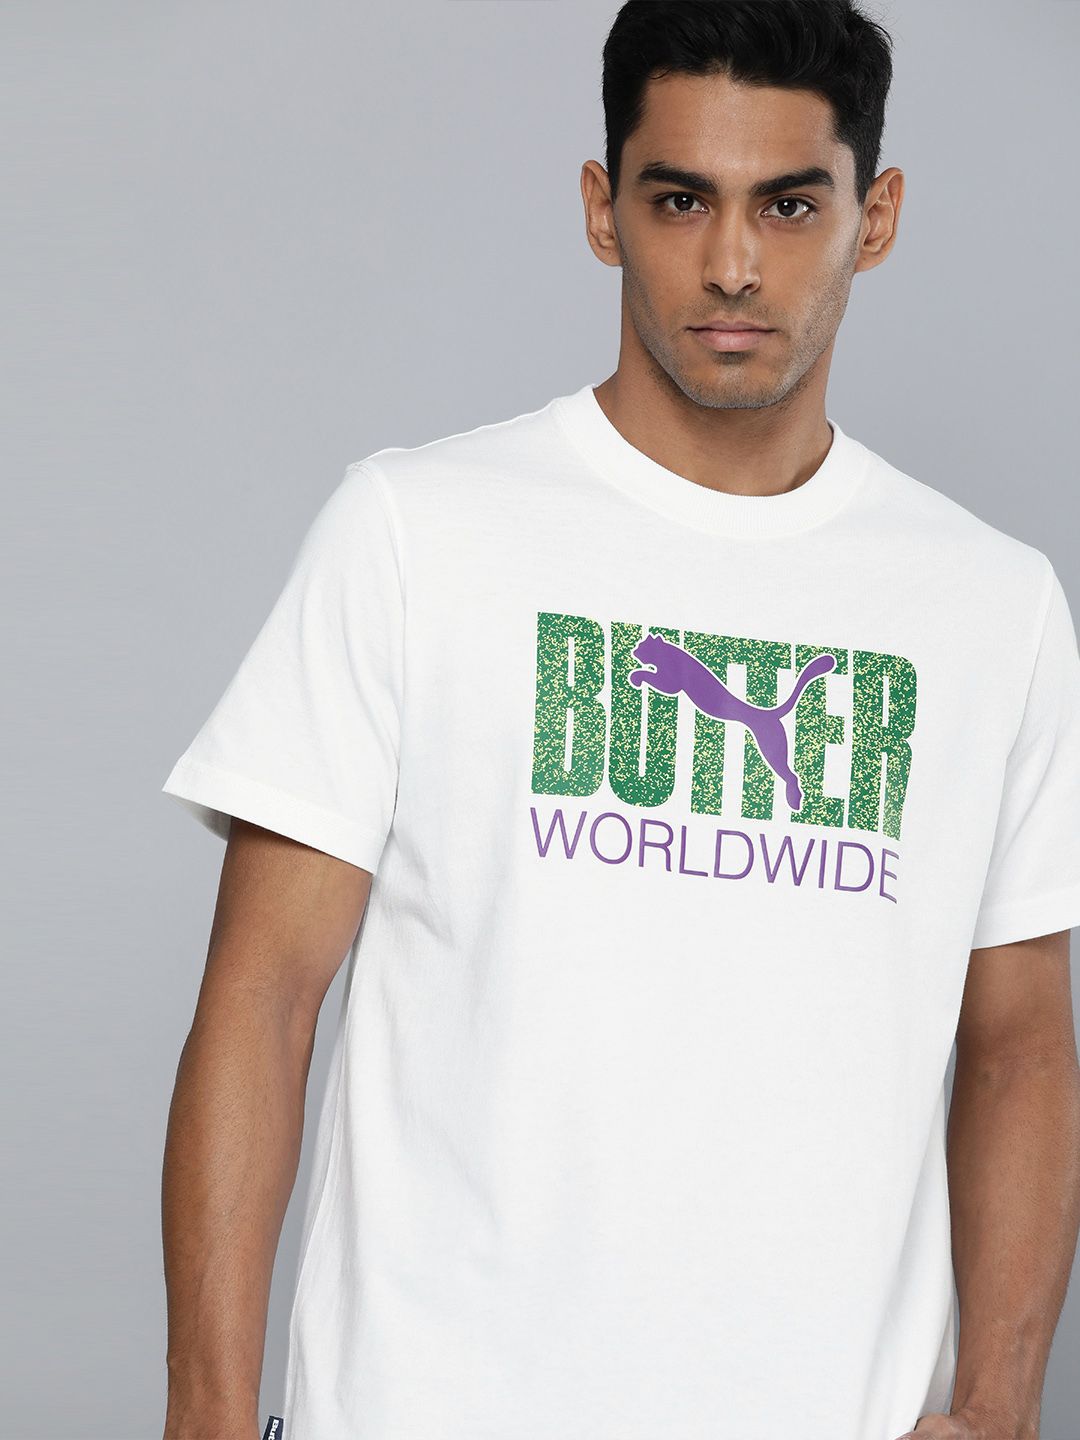 Puma Unisex White  Green Butter Goods Graphic Loose Printed Pure Cotton T-shirt Price in India